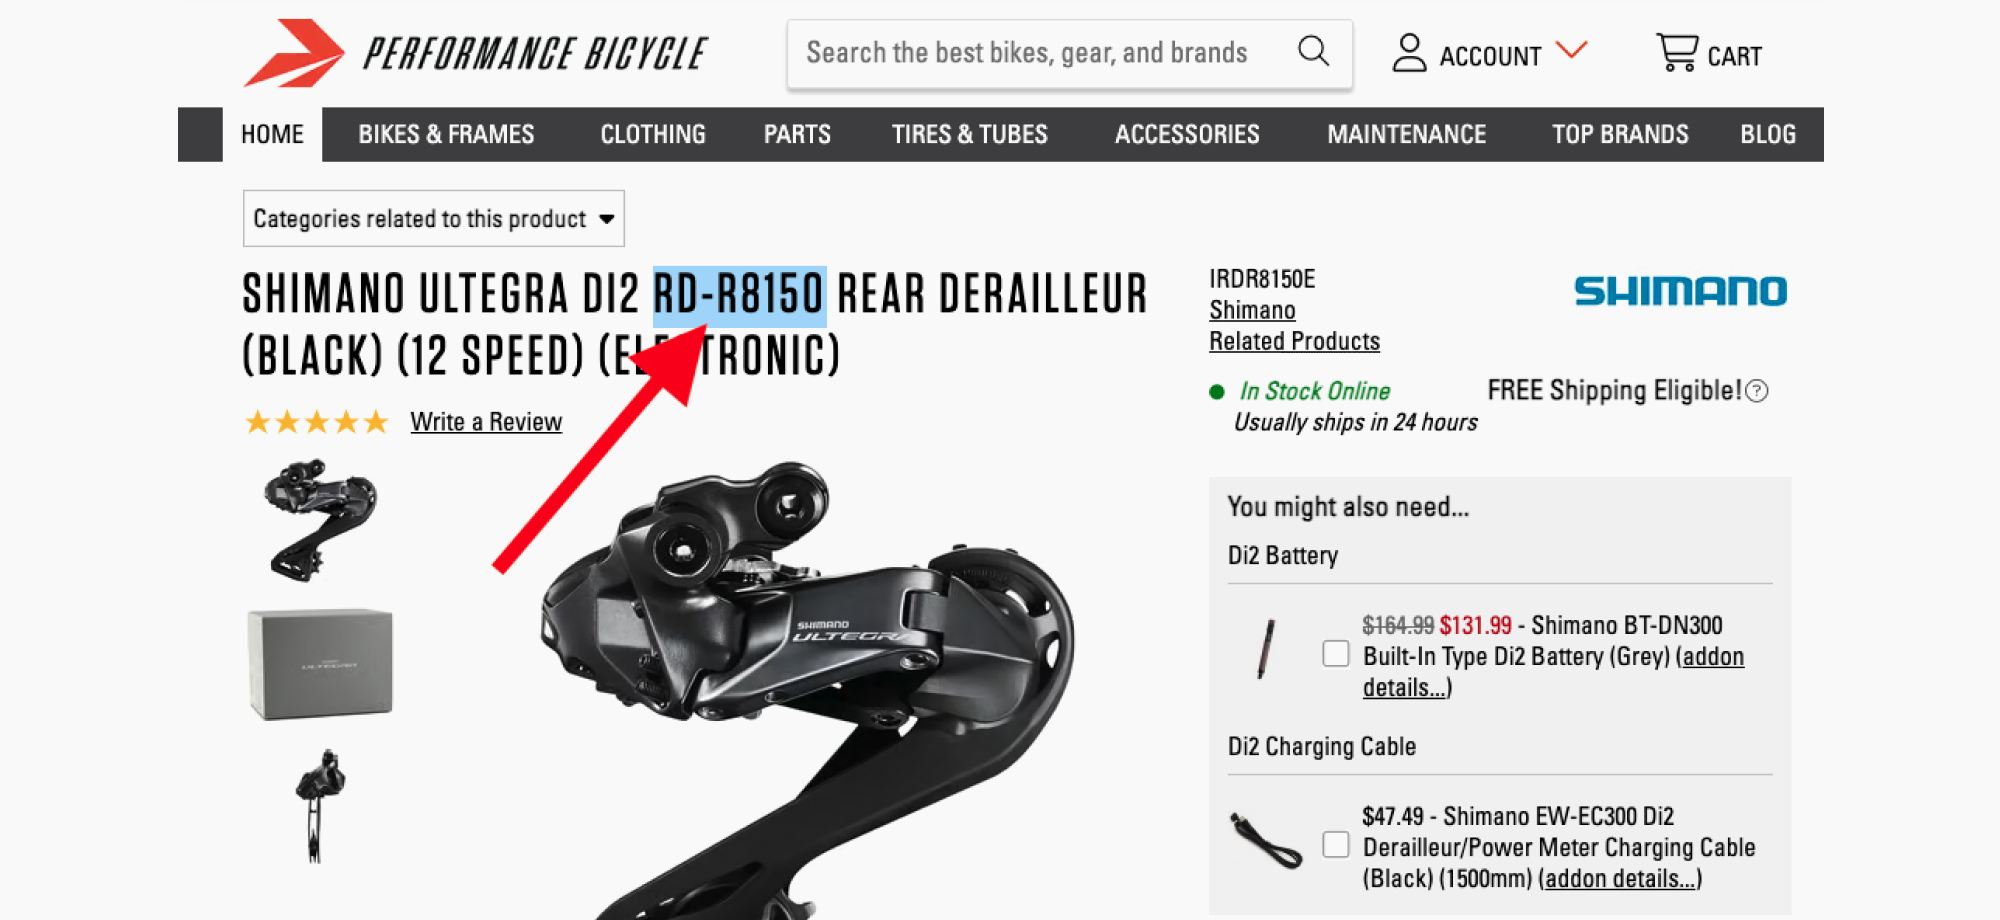 image of performance bicycle product page